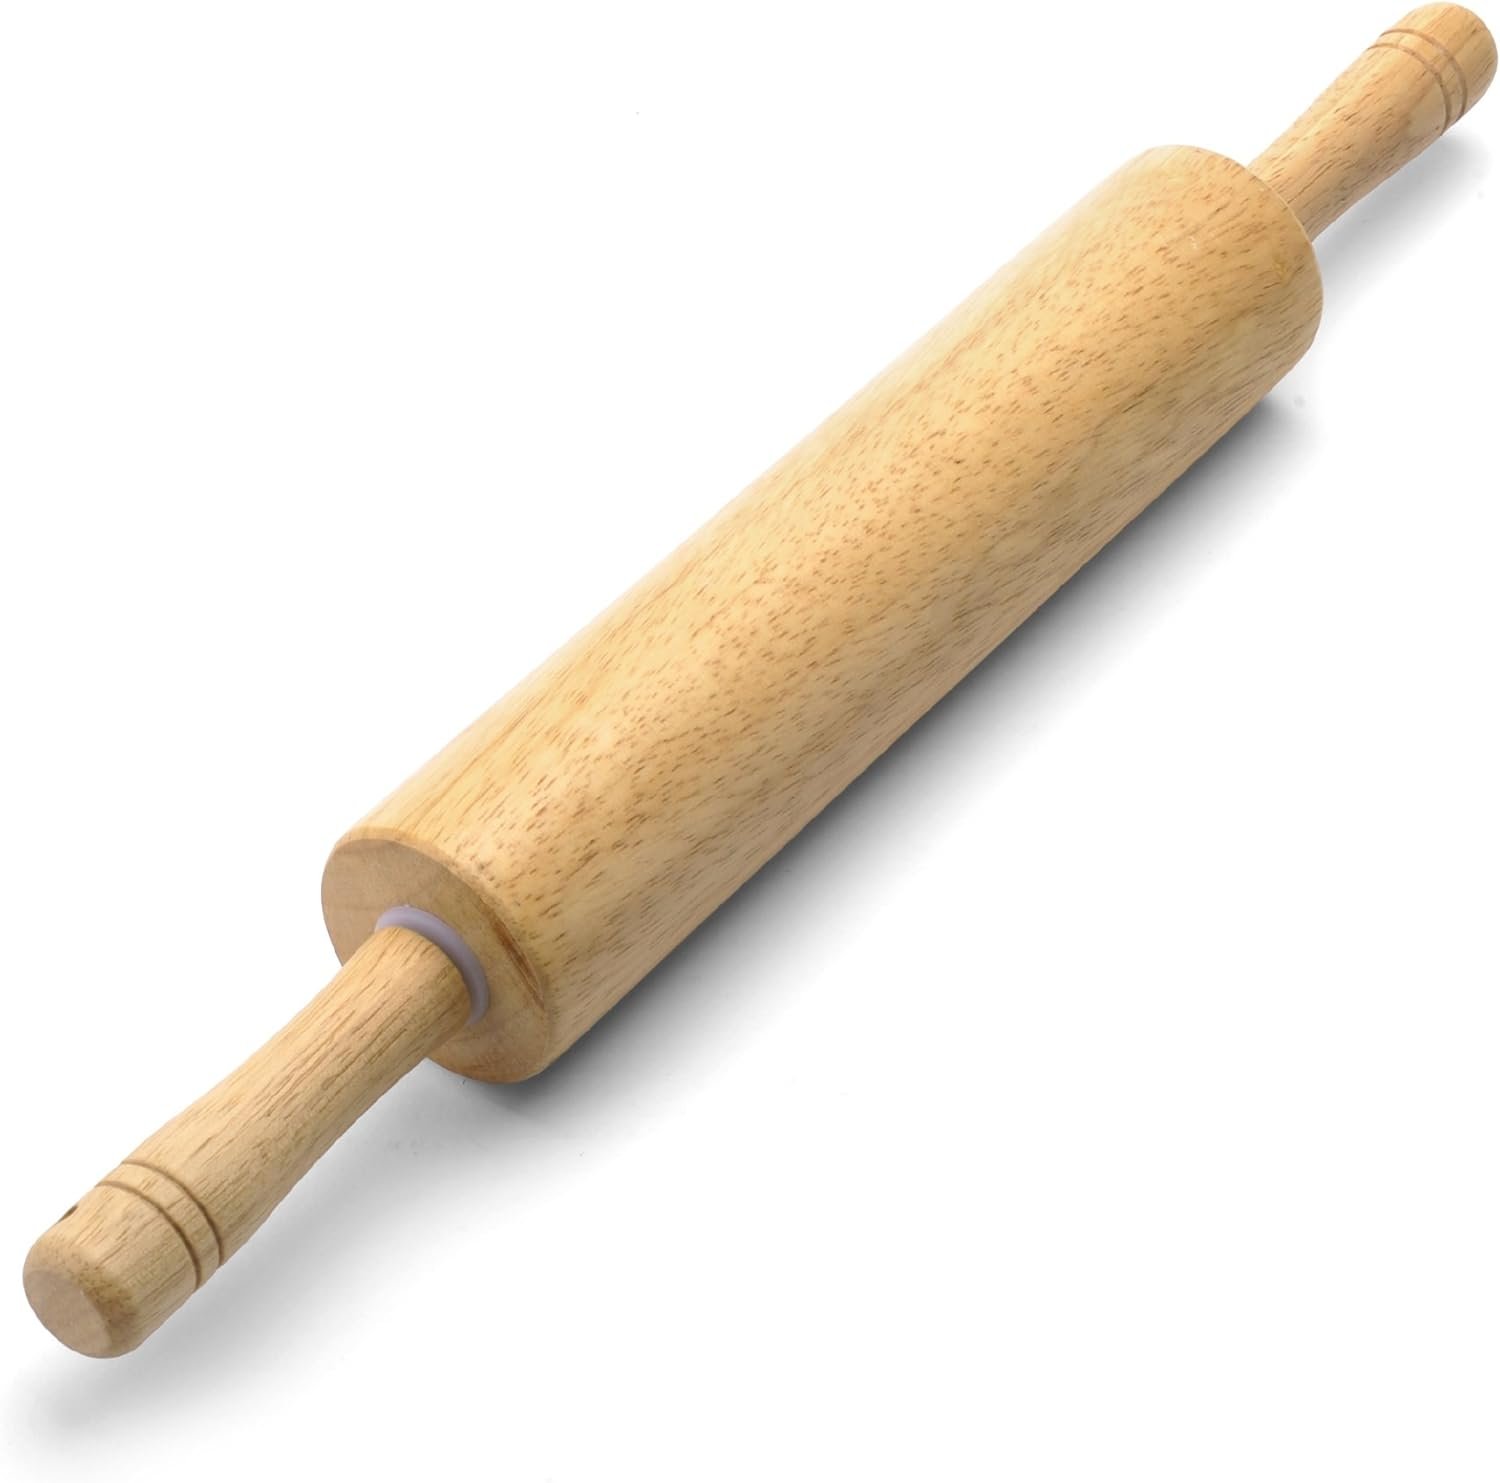 wooden rolling pin